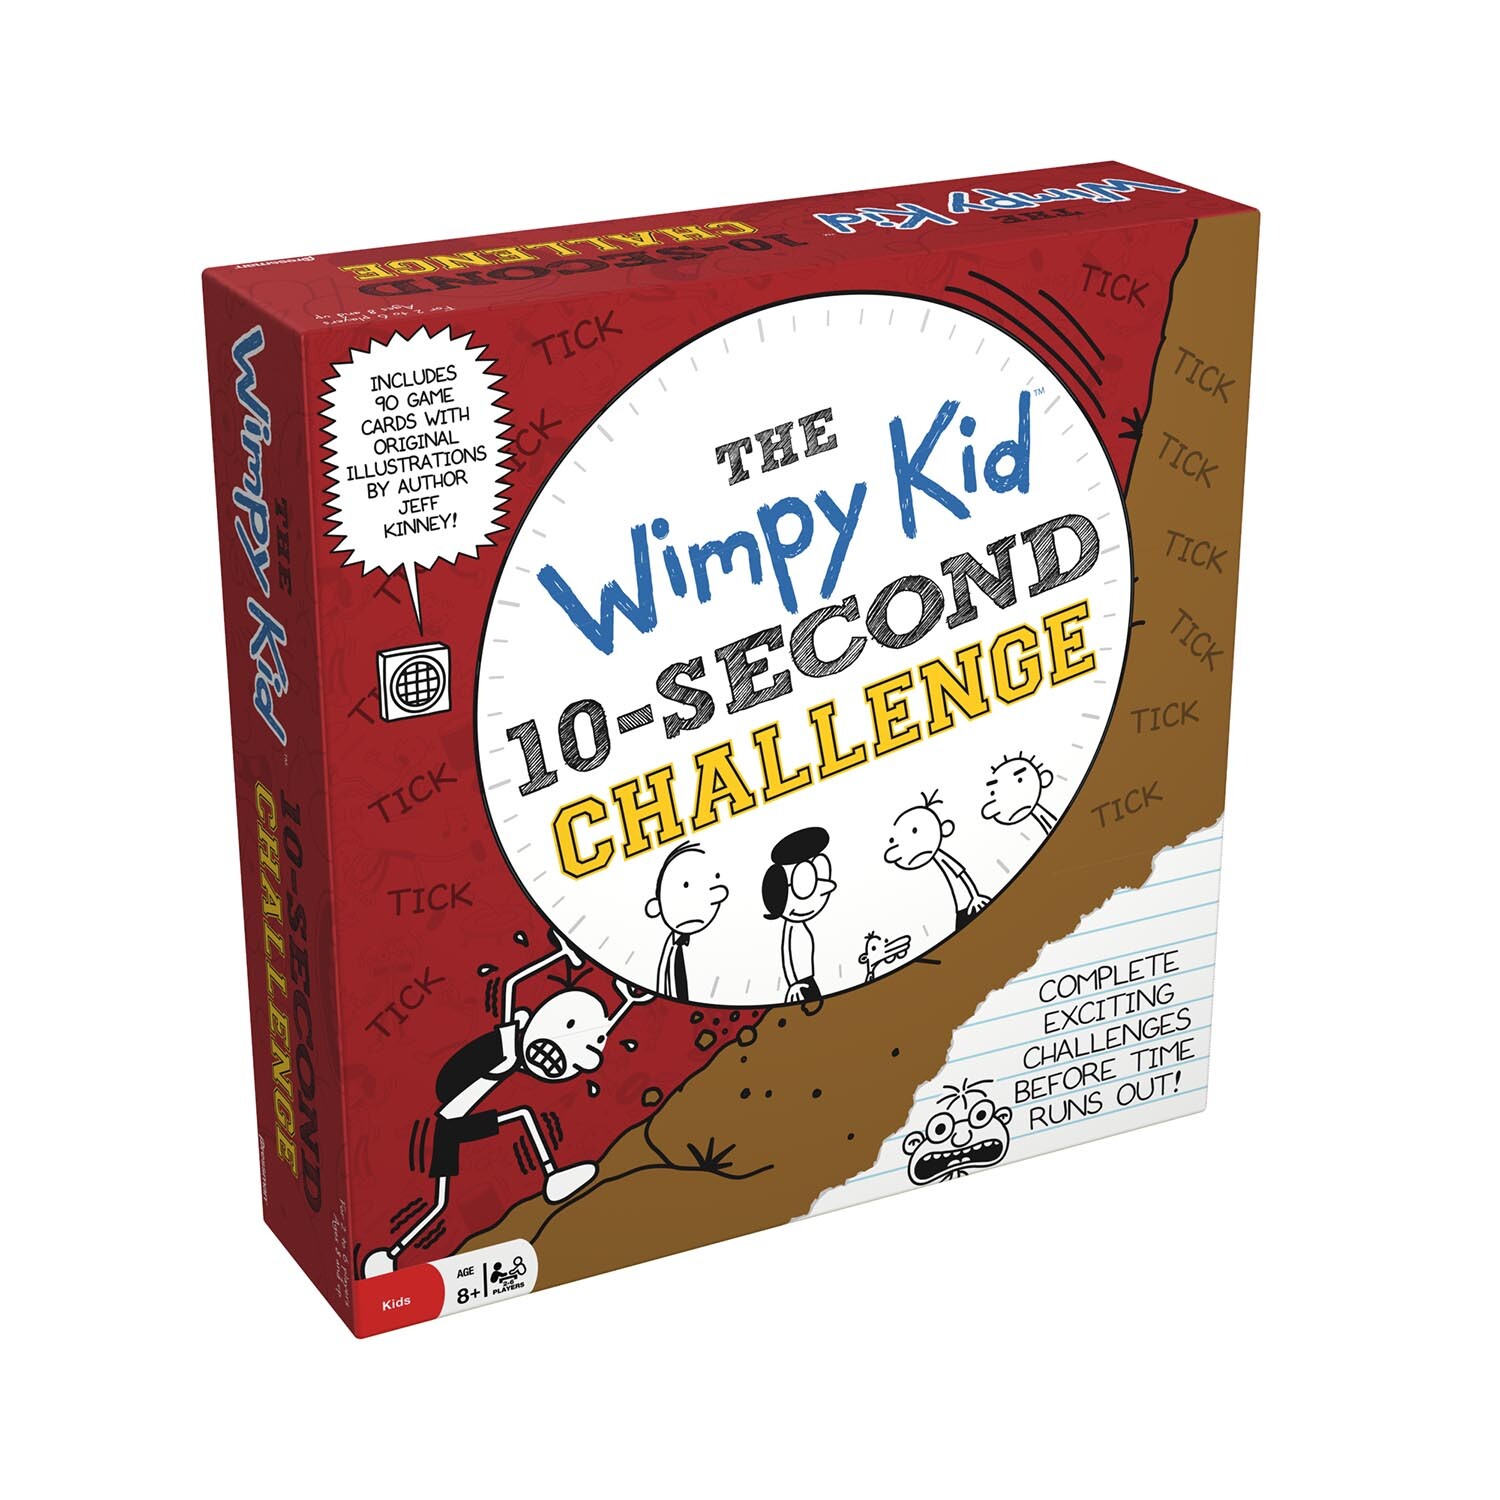 Diary of a Wimpy Kid 10-Second Challenge - Red Image 2